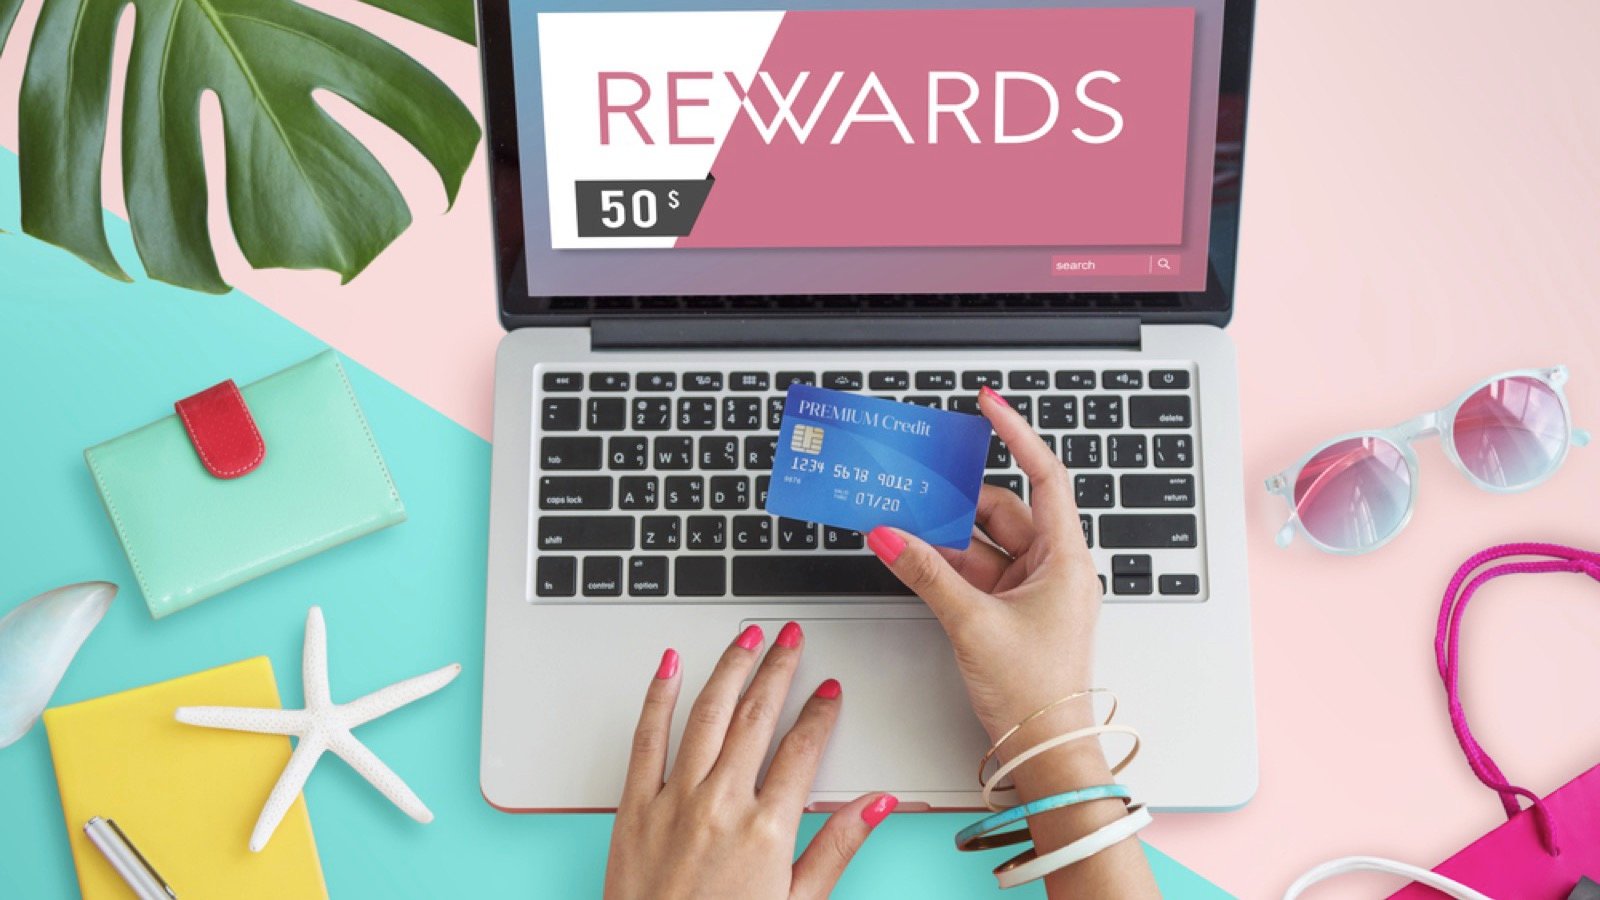 <p>While you’re away, you can still adhere to your regular budget plan. If collecting reward points and cashback forms part of your strategy, continue that plan at participating outlets abroad if possible. Every dollar and cent earned adds up and keeps the domestic and overseas budgets ticking.</p>